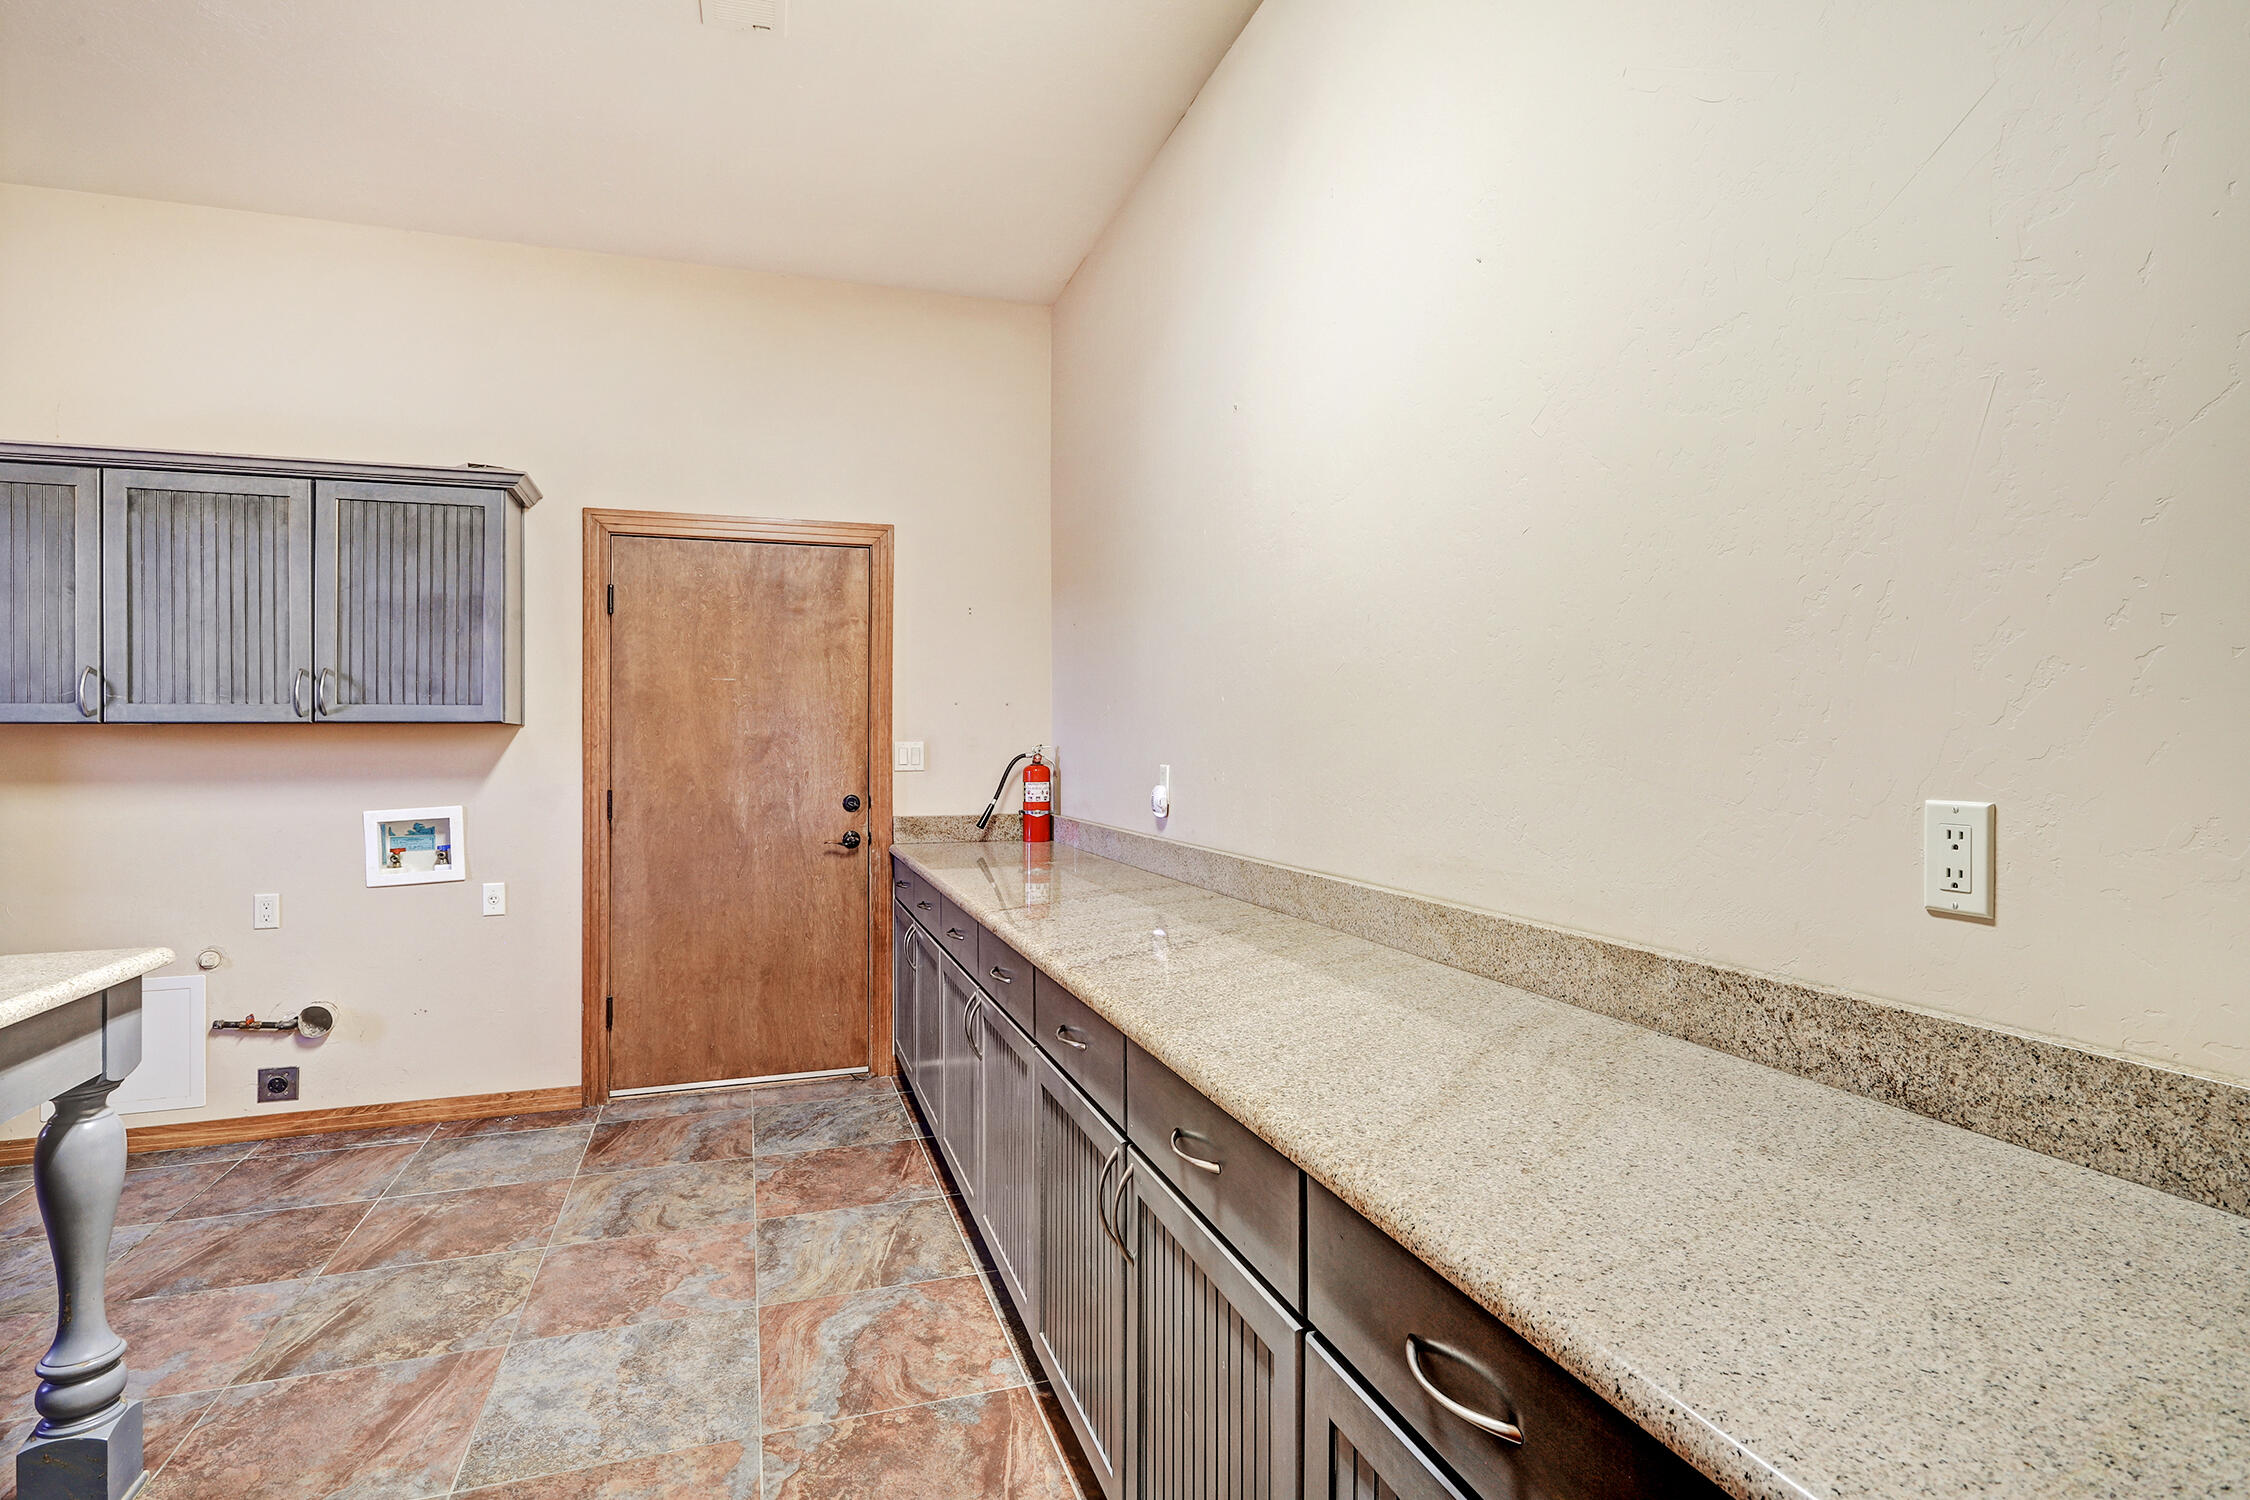 30 Turquoise Drive, Sandia Park, New Mexico 87047, 3 Bedrooms Bedrooms, ,3 BathroomsBathrooms,Residential,For Sale,30 Turquoise Drive,1061203